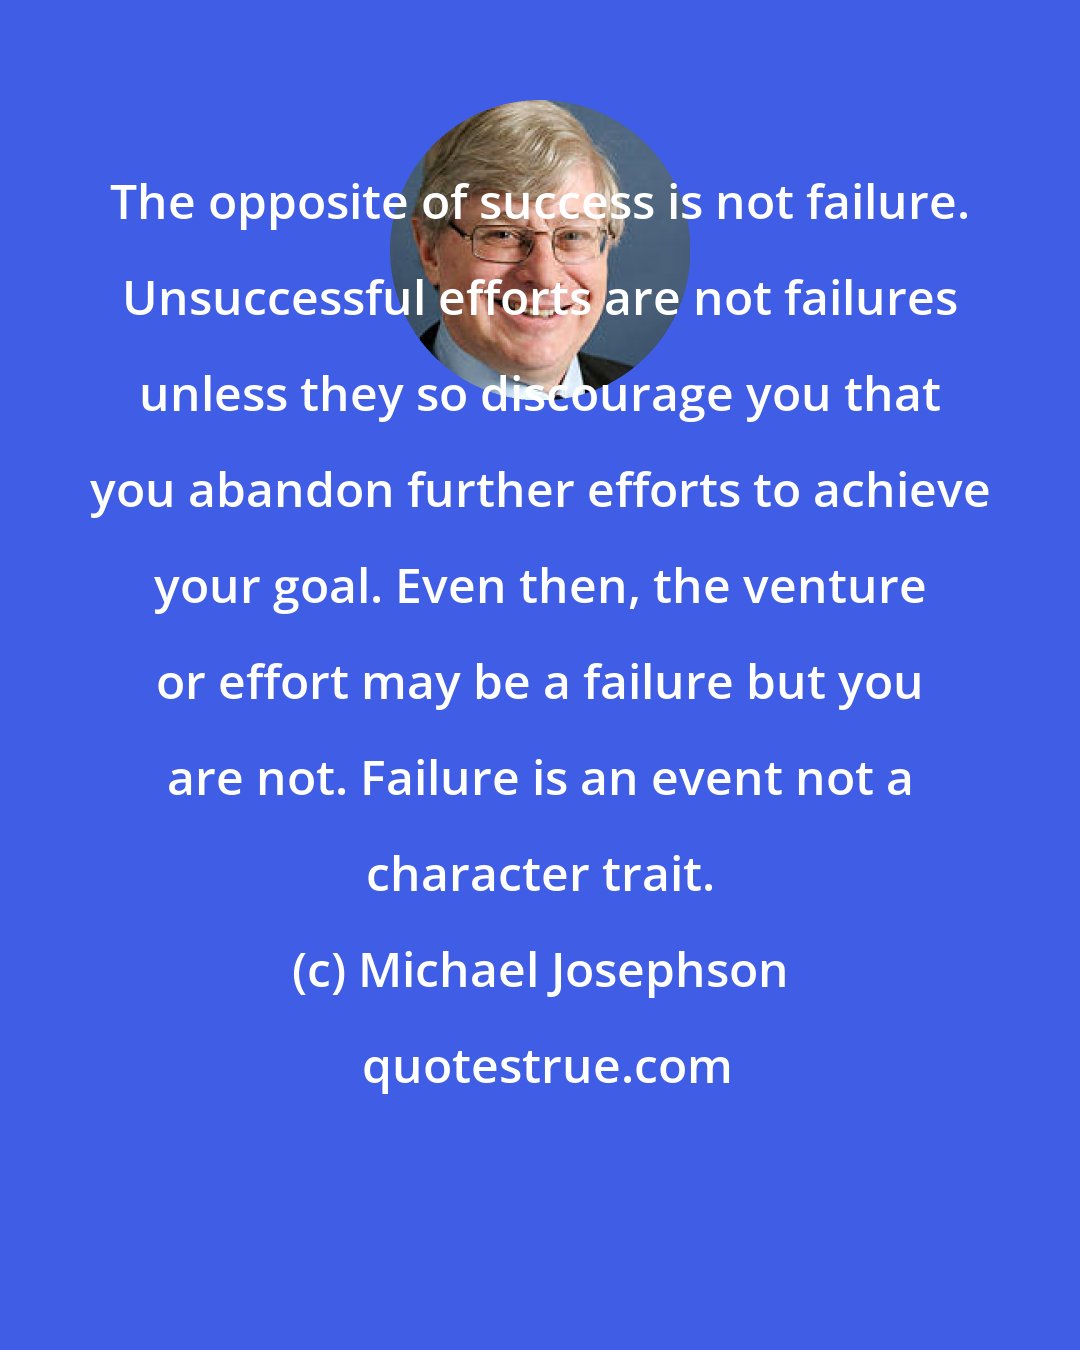 Michael Josephson: The opposite of success is not failure. Unsuccessful efforts are not failures unless they so discourage you that you abandon further efforts to achieve your goal. Even then, the venture or effort may be a failure but you are not. Failure is an event not a character trait.